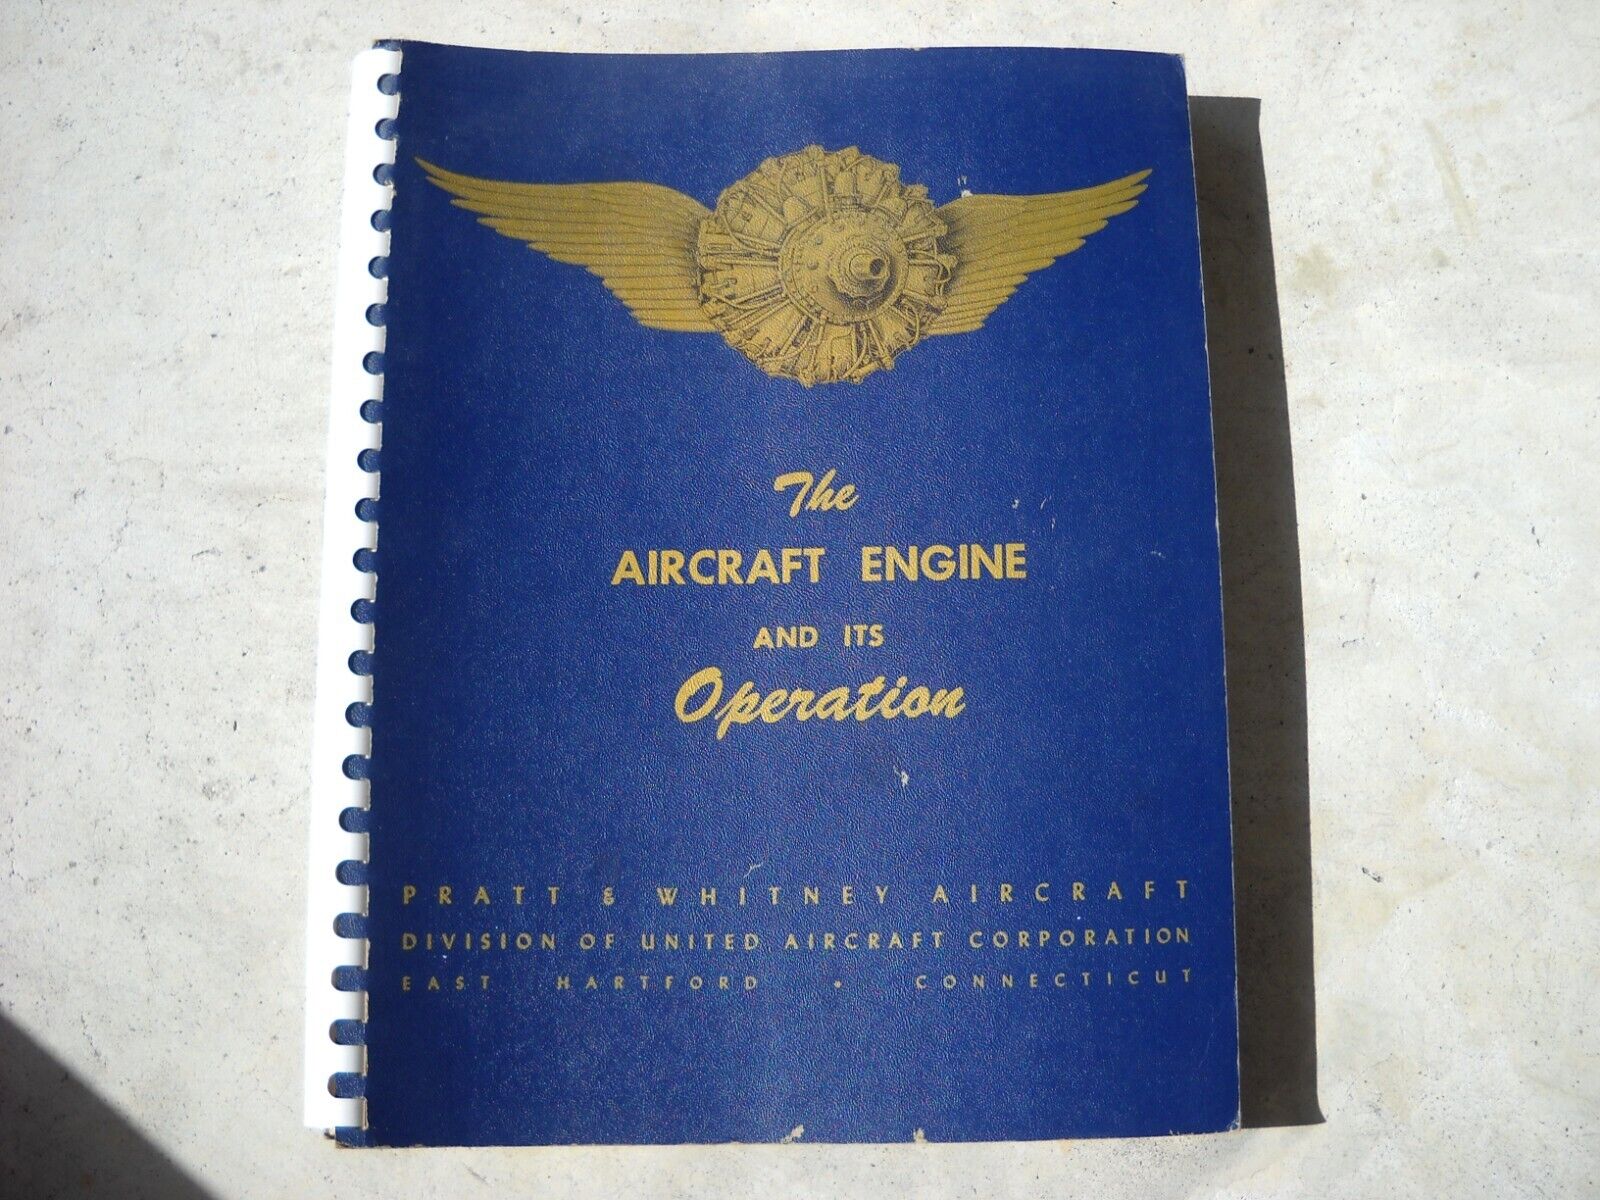 The Aircraft Engine and its Operation